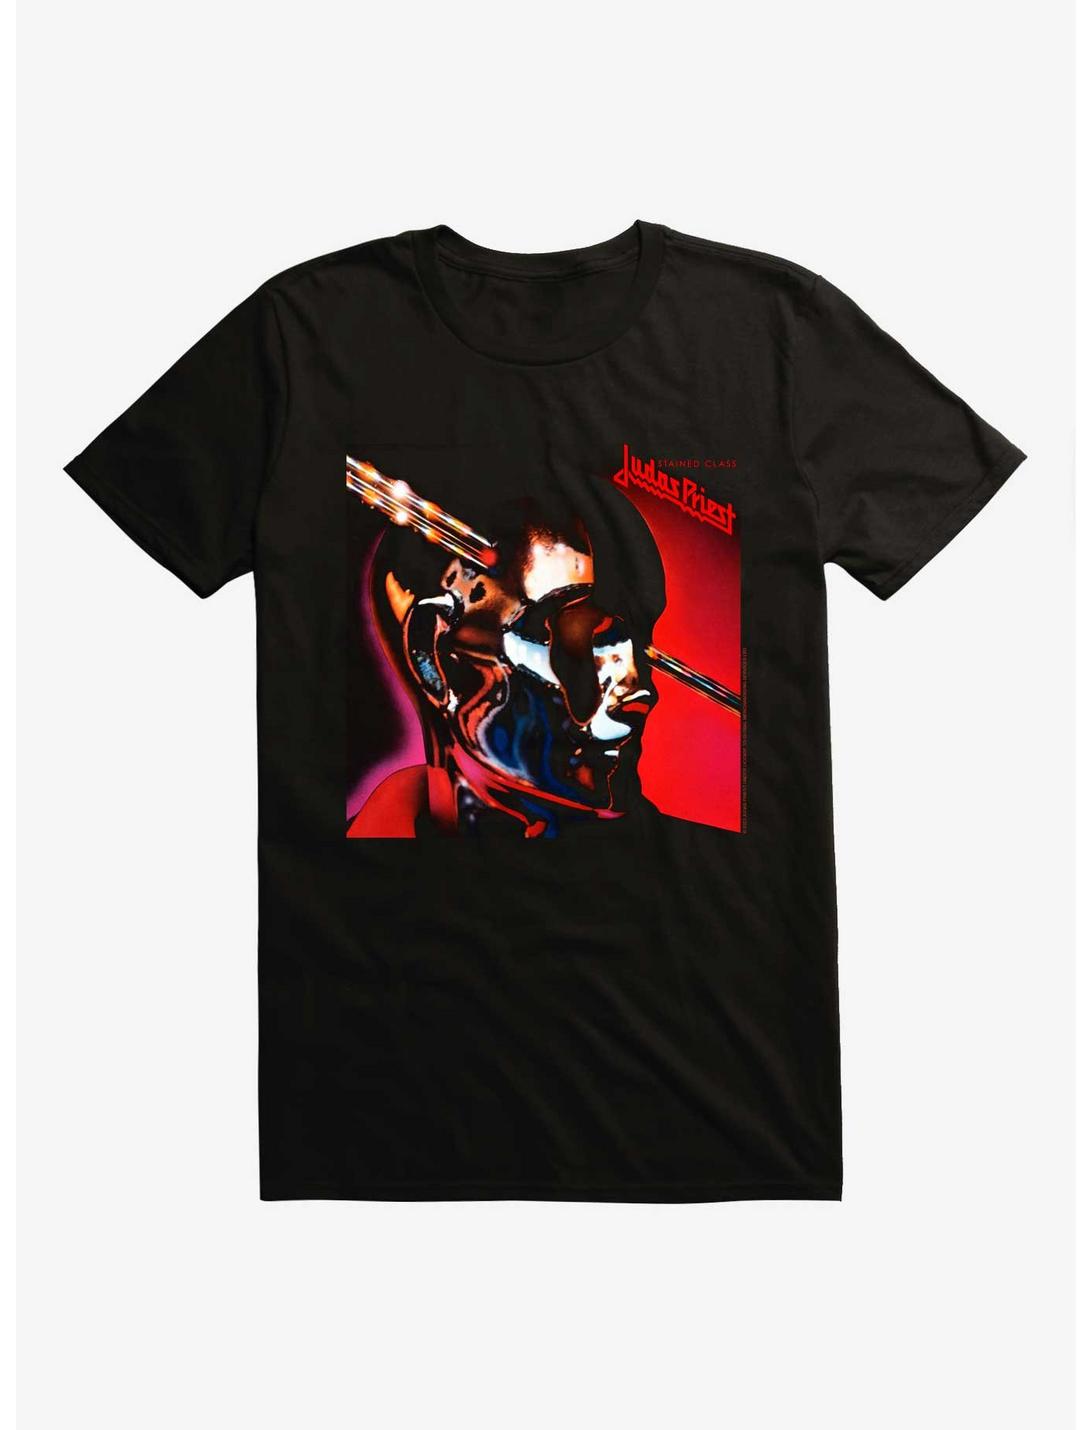 Judas Priest Stained Class T-Shirt, BLACK, hi-res